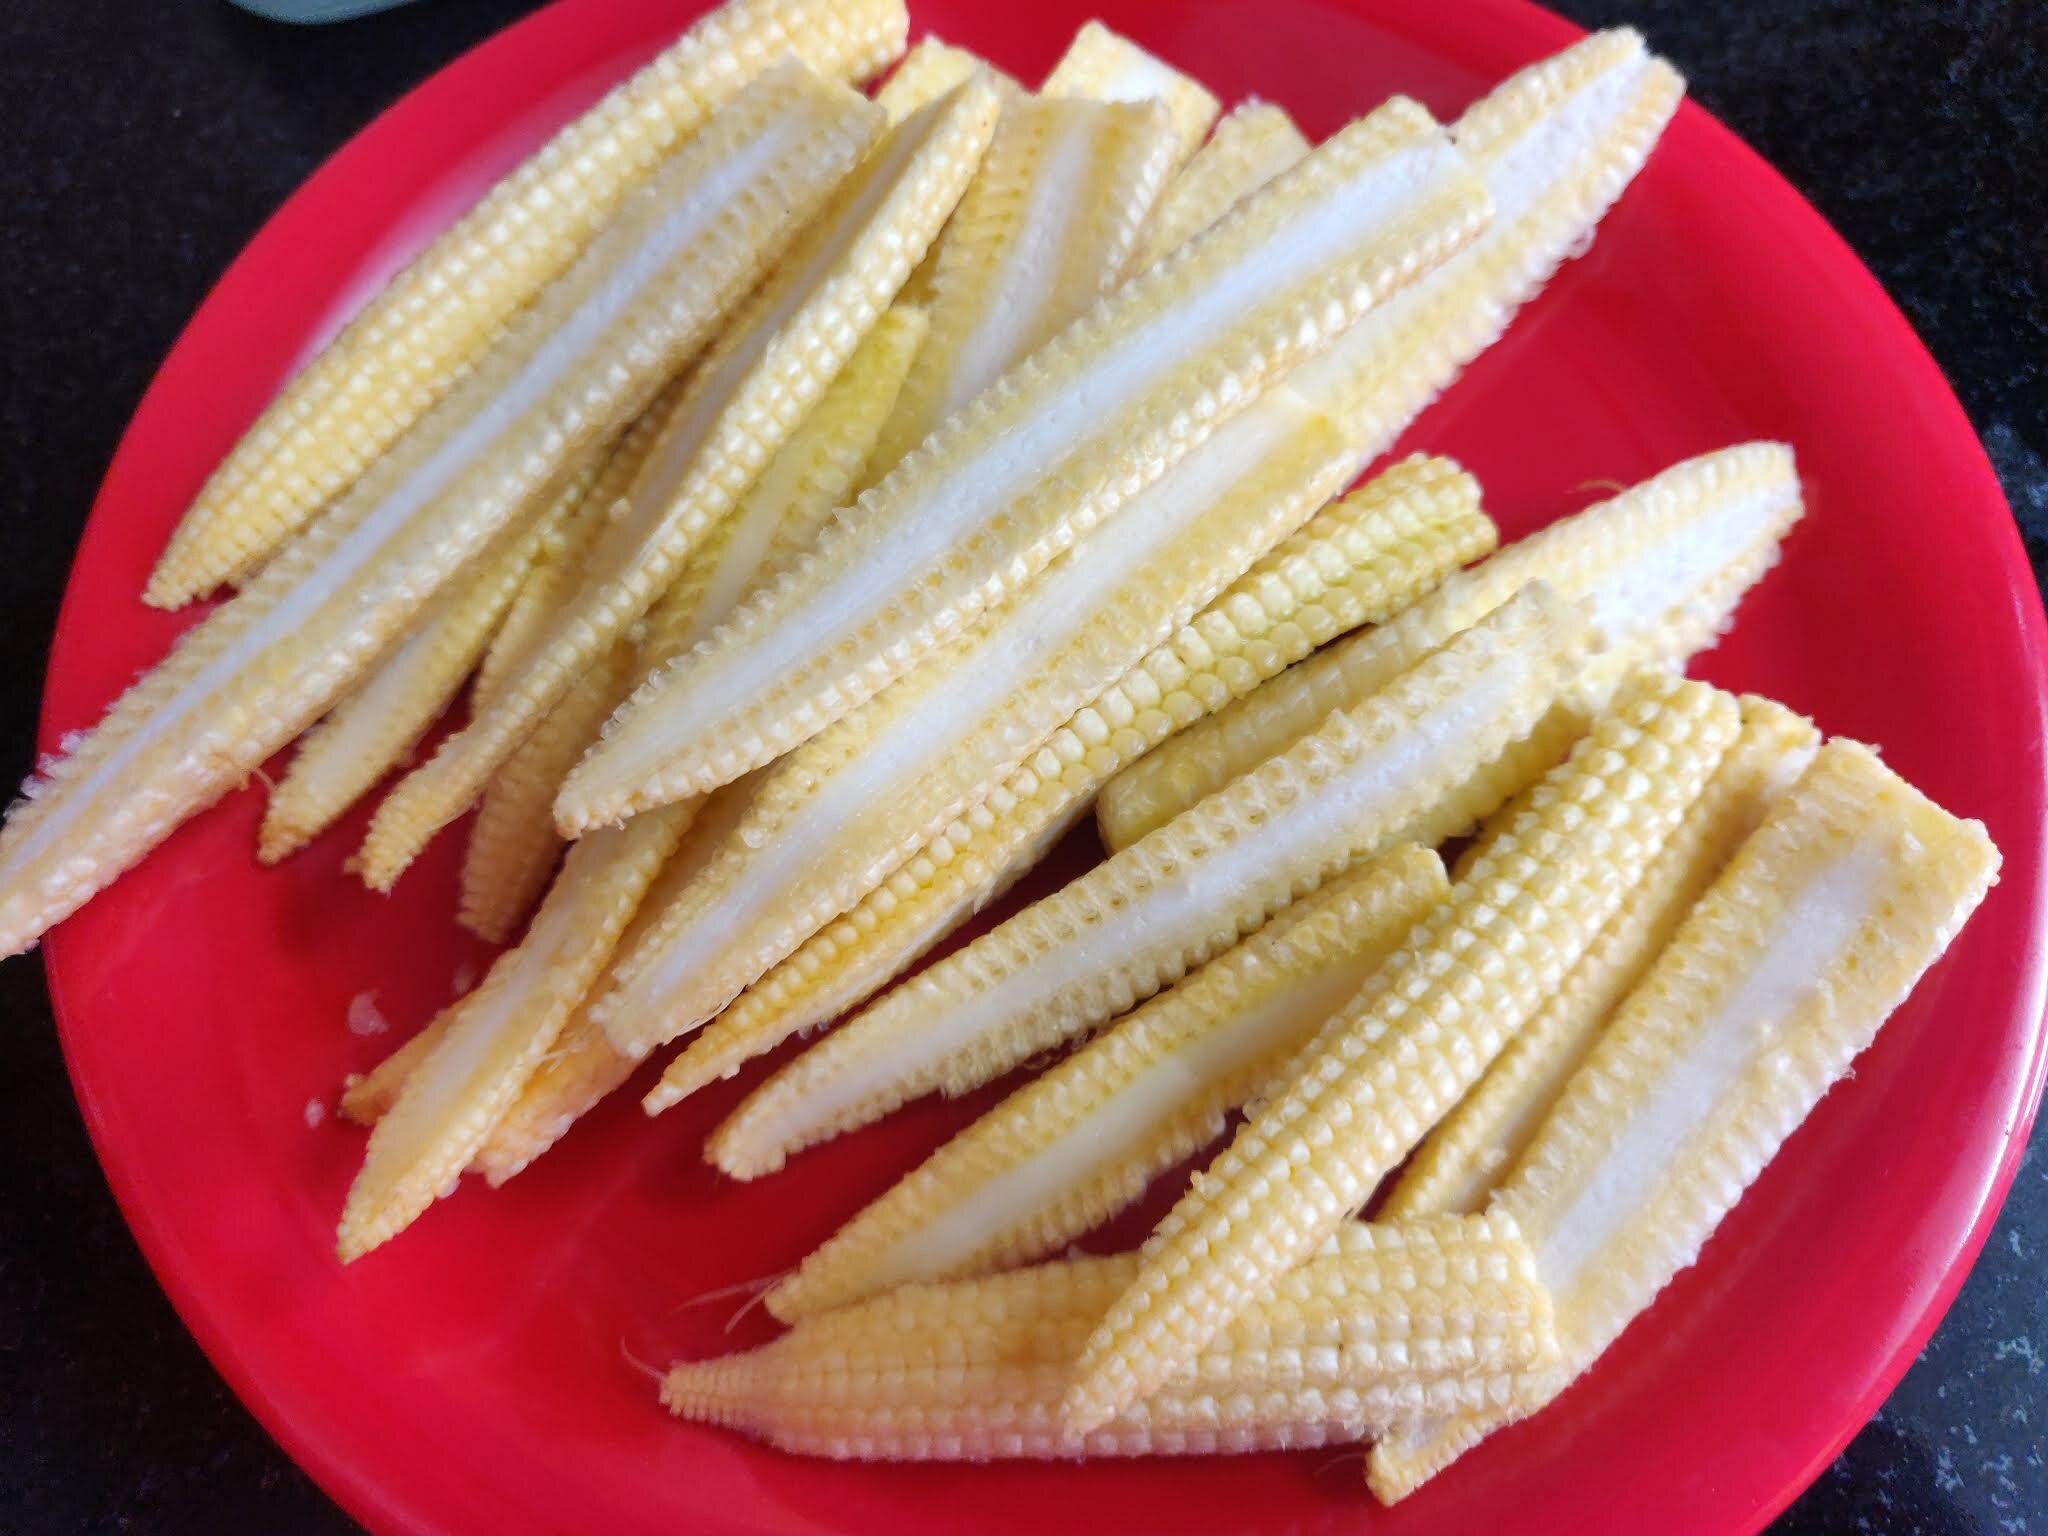 Cleaning and slicing the baby corns.